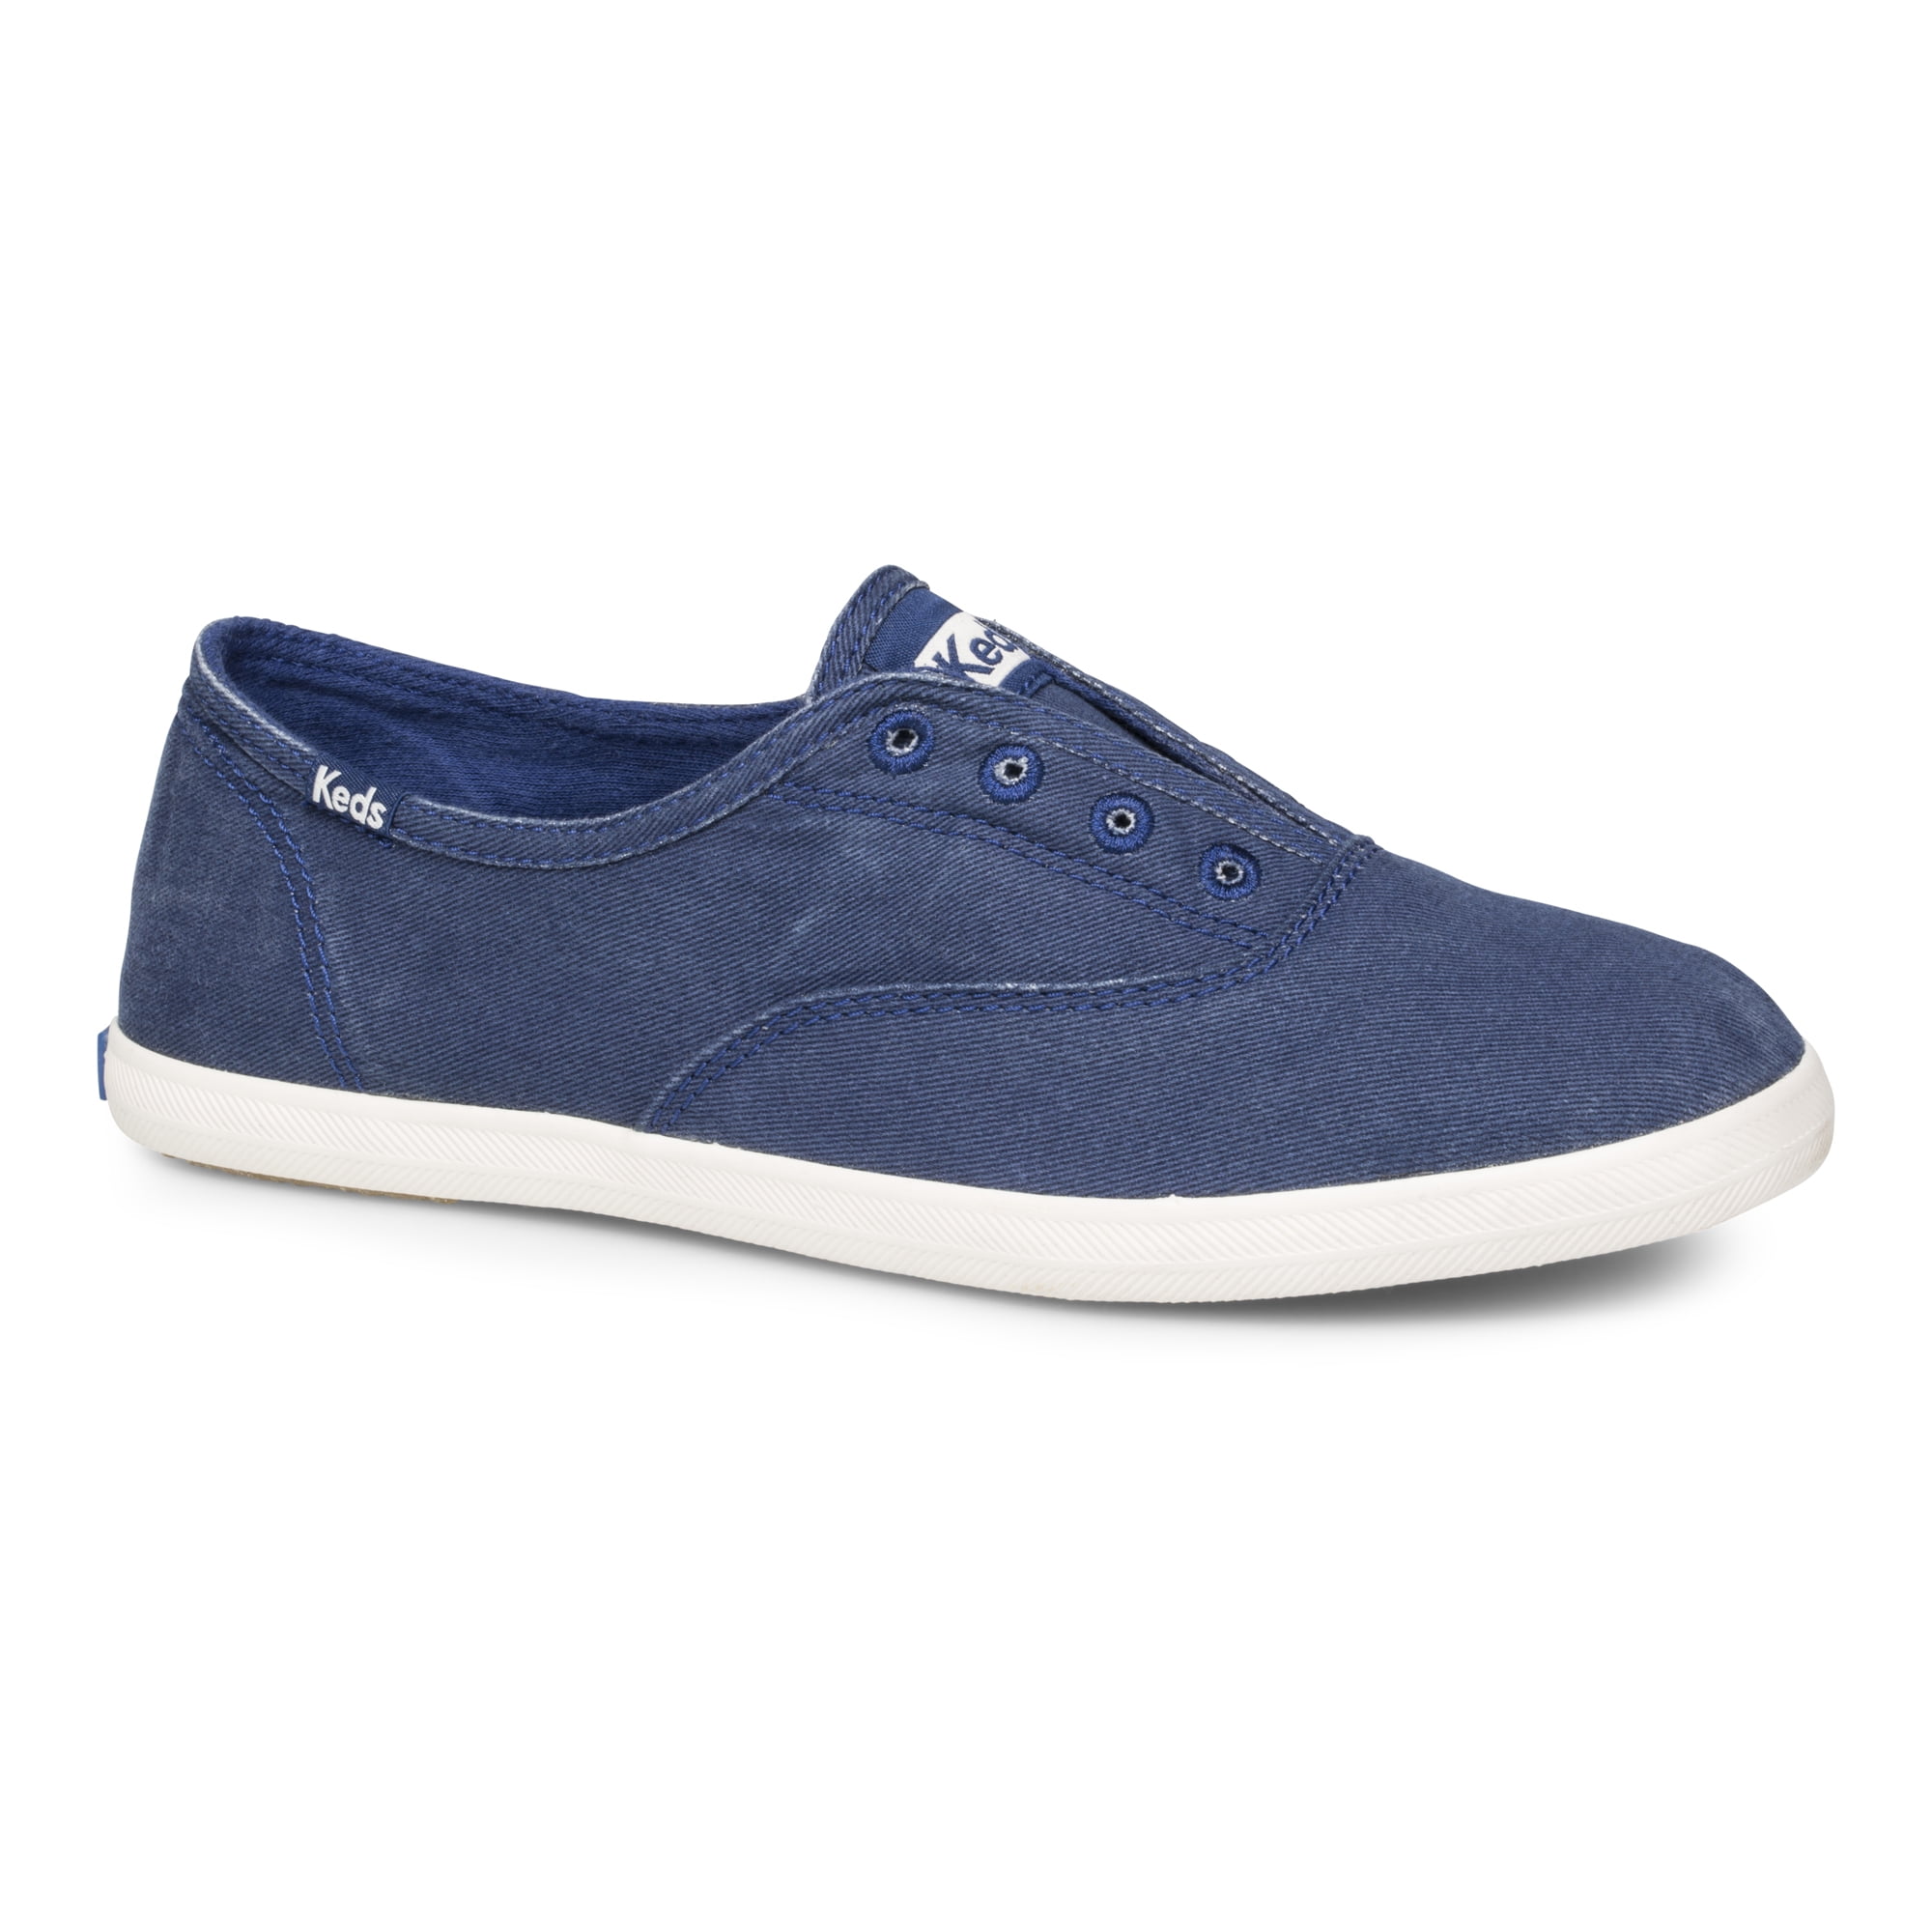 keds chillax sneakers